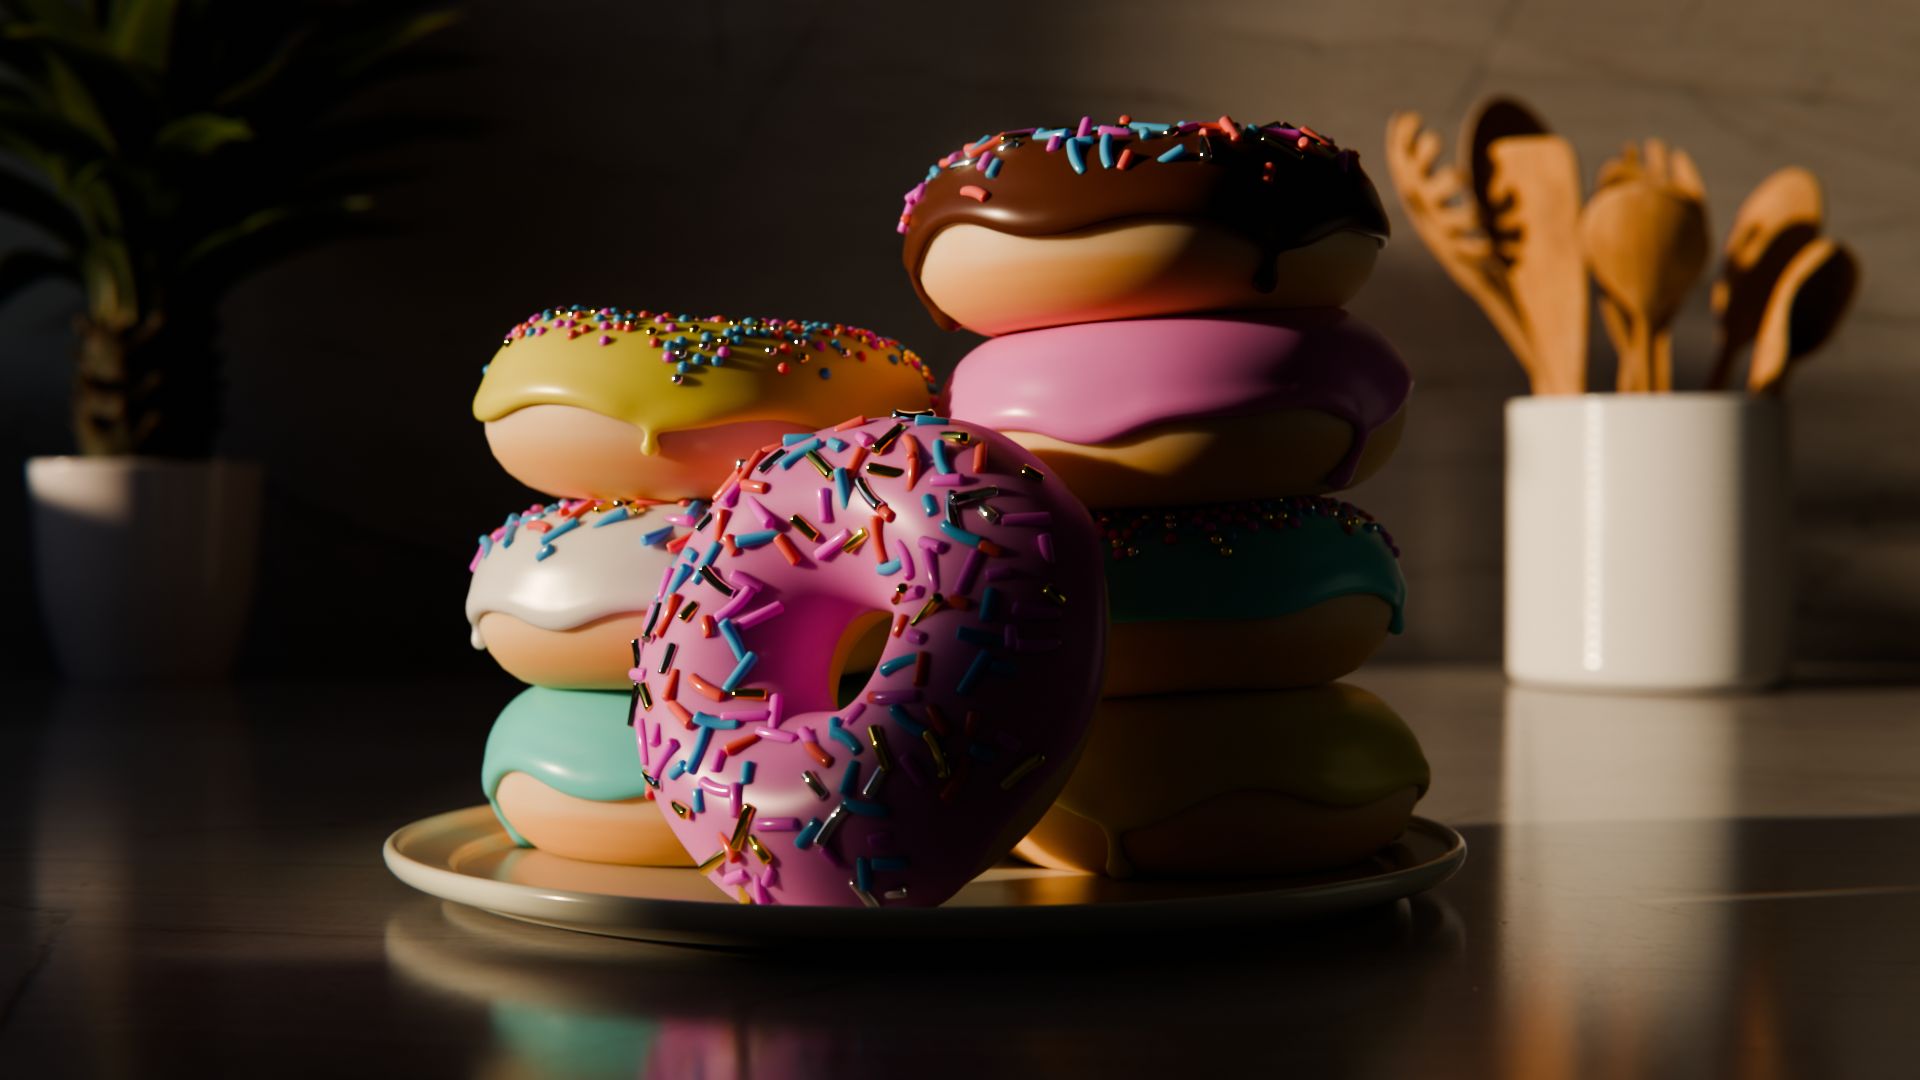 A stack of 3D modelled Donuts